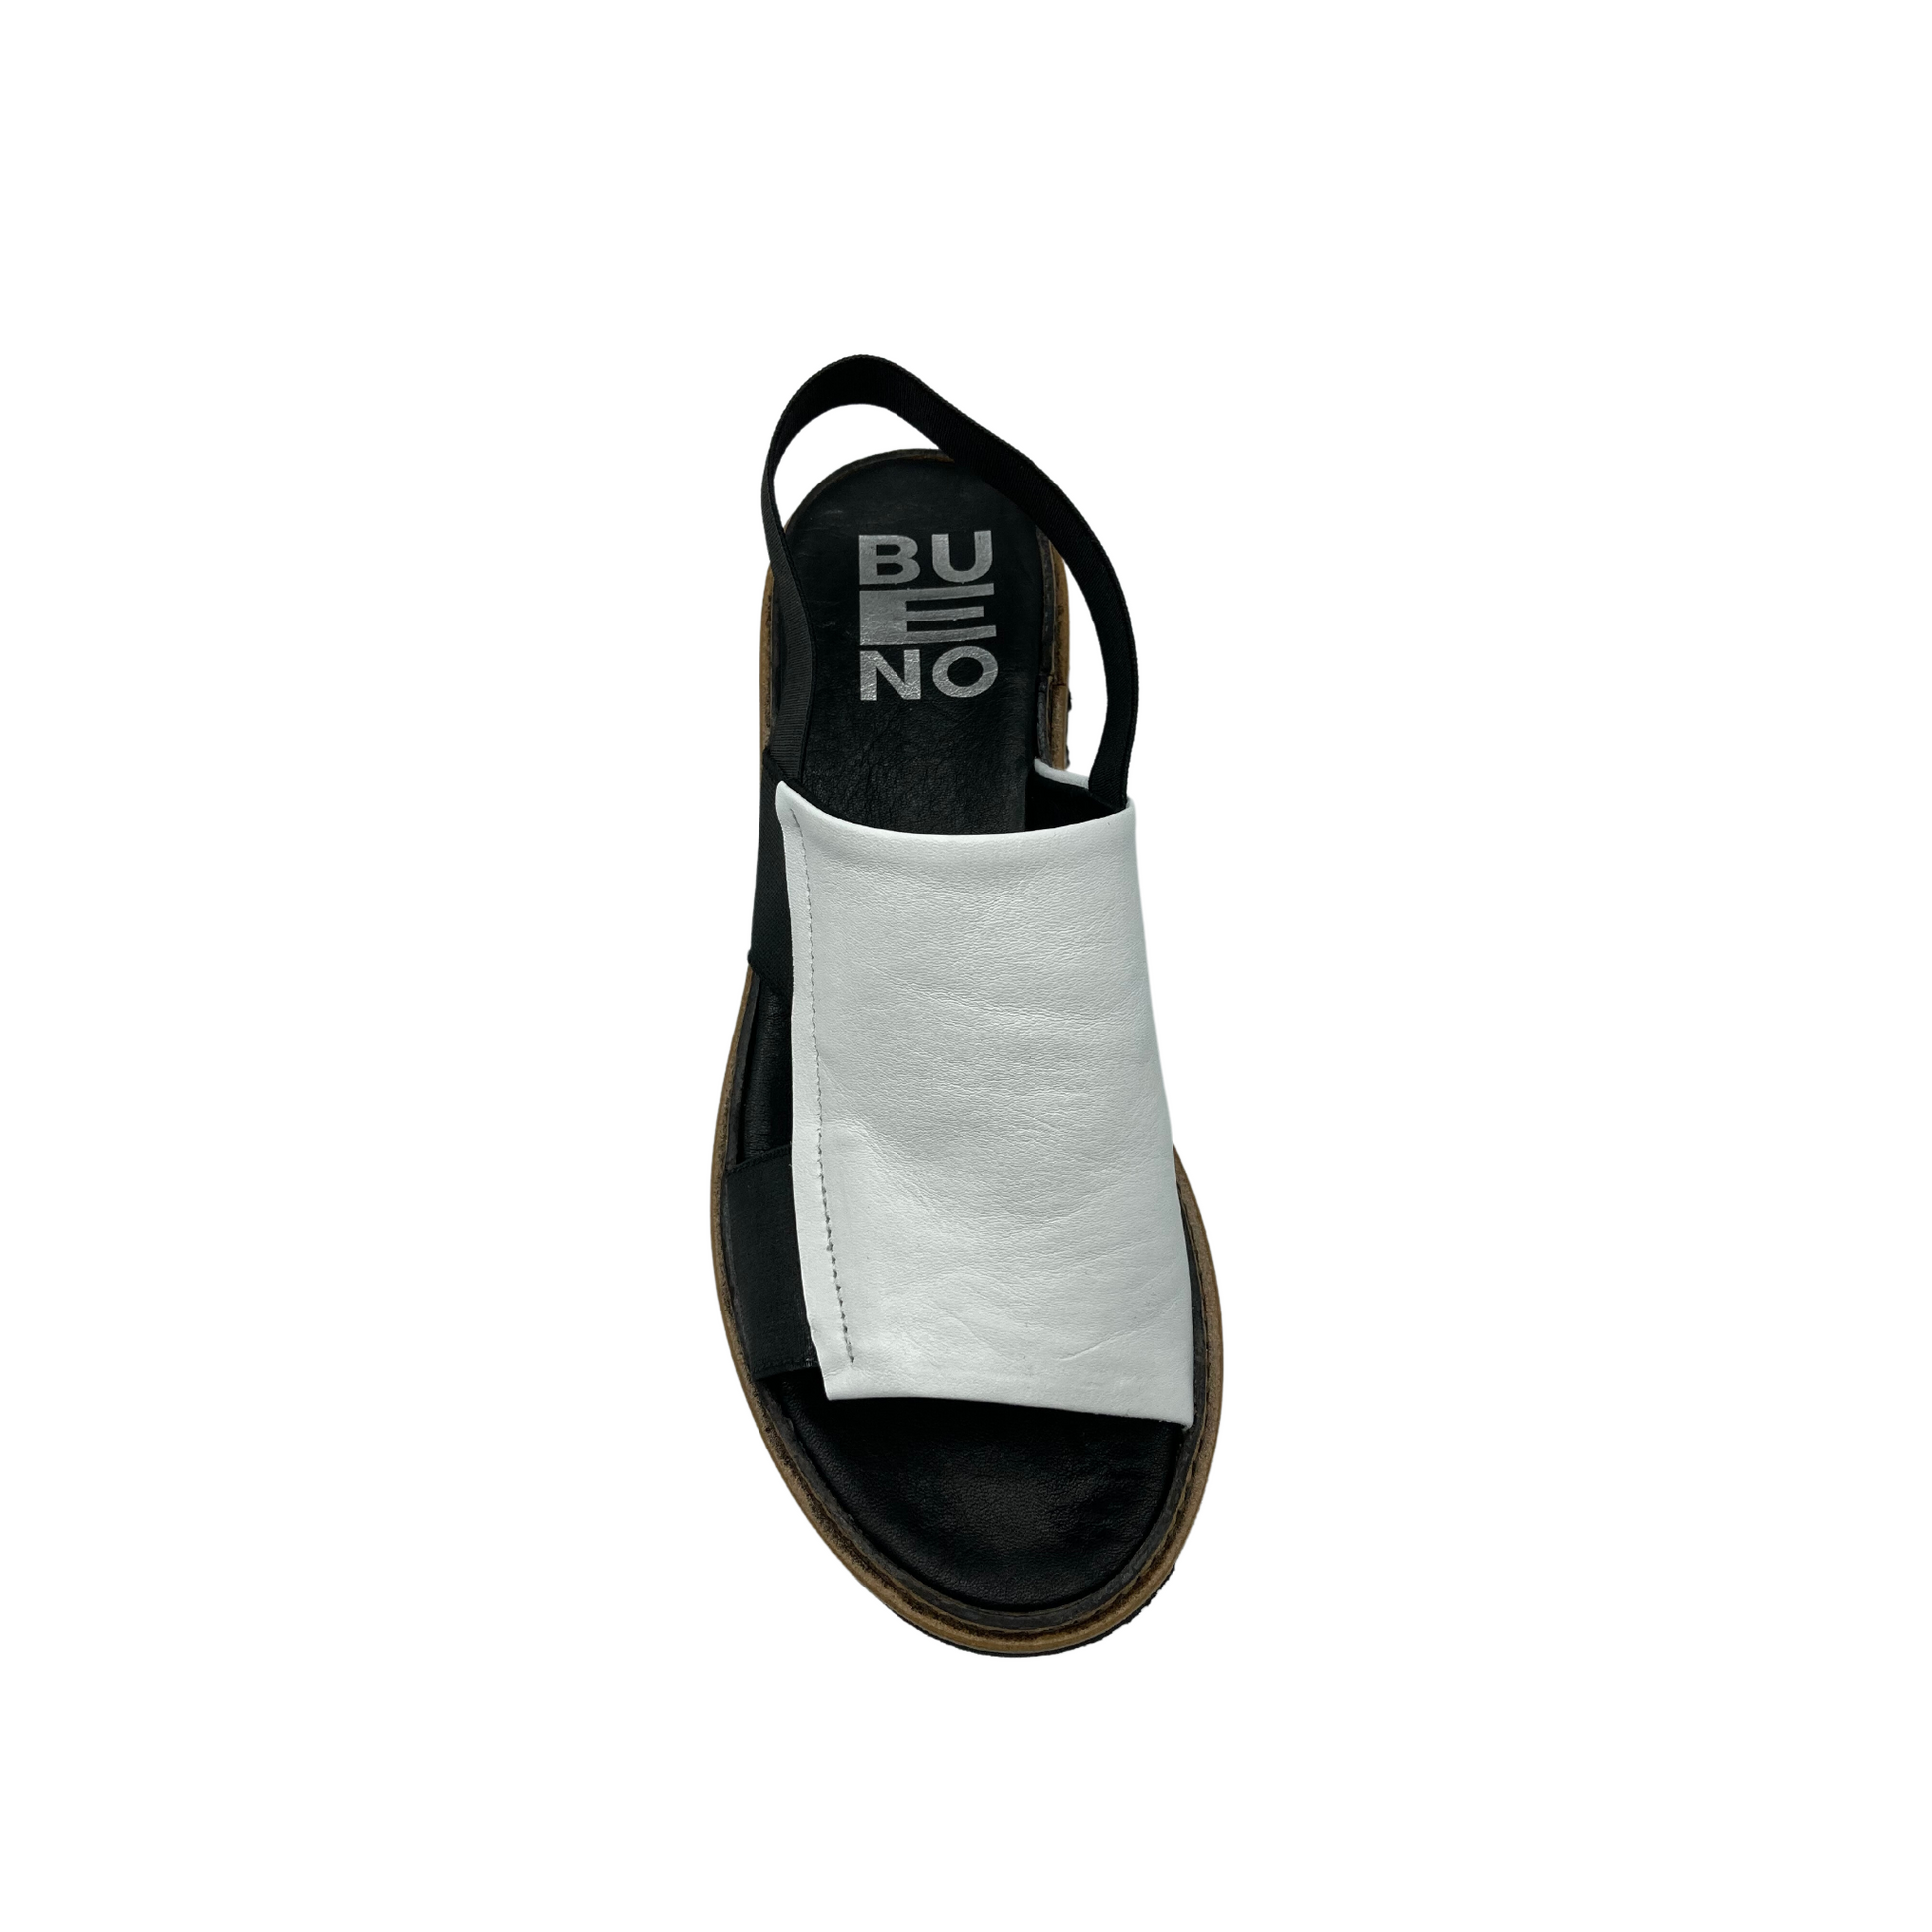 Top down view of Bueno Amy in the black/white combination.  Open toe slip on style with elastic back strap.  Wide leather band covers from toes to top of foot at ankle